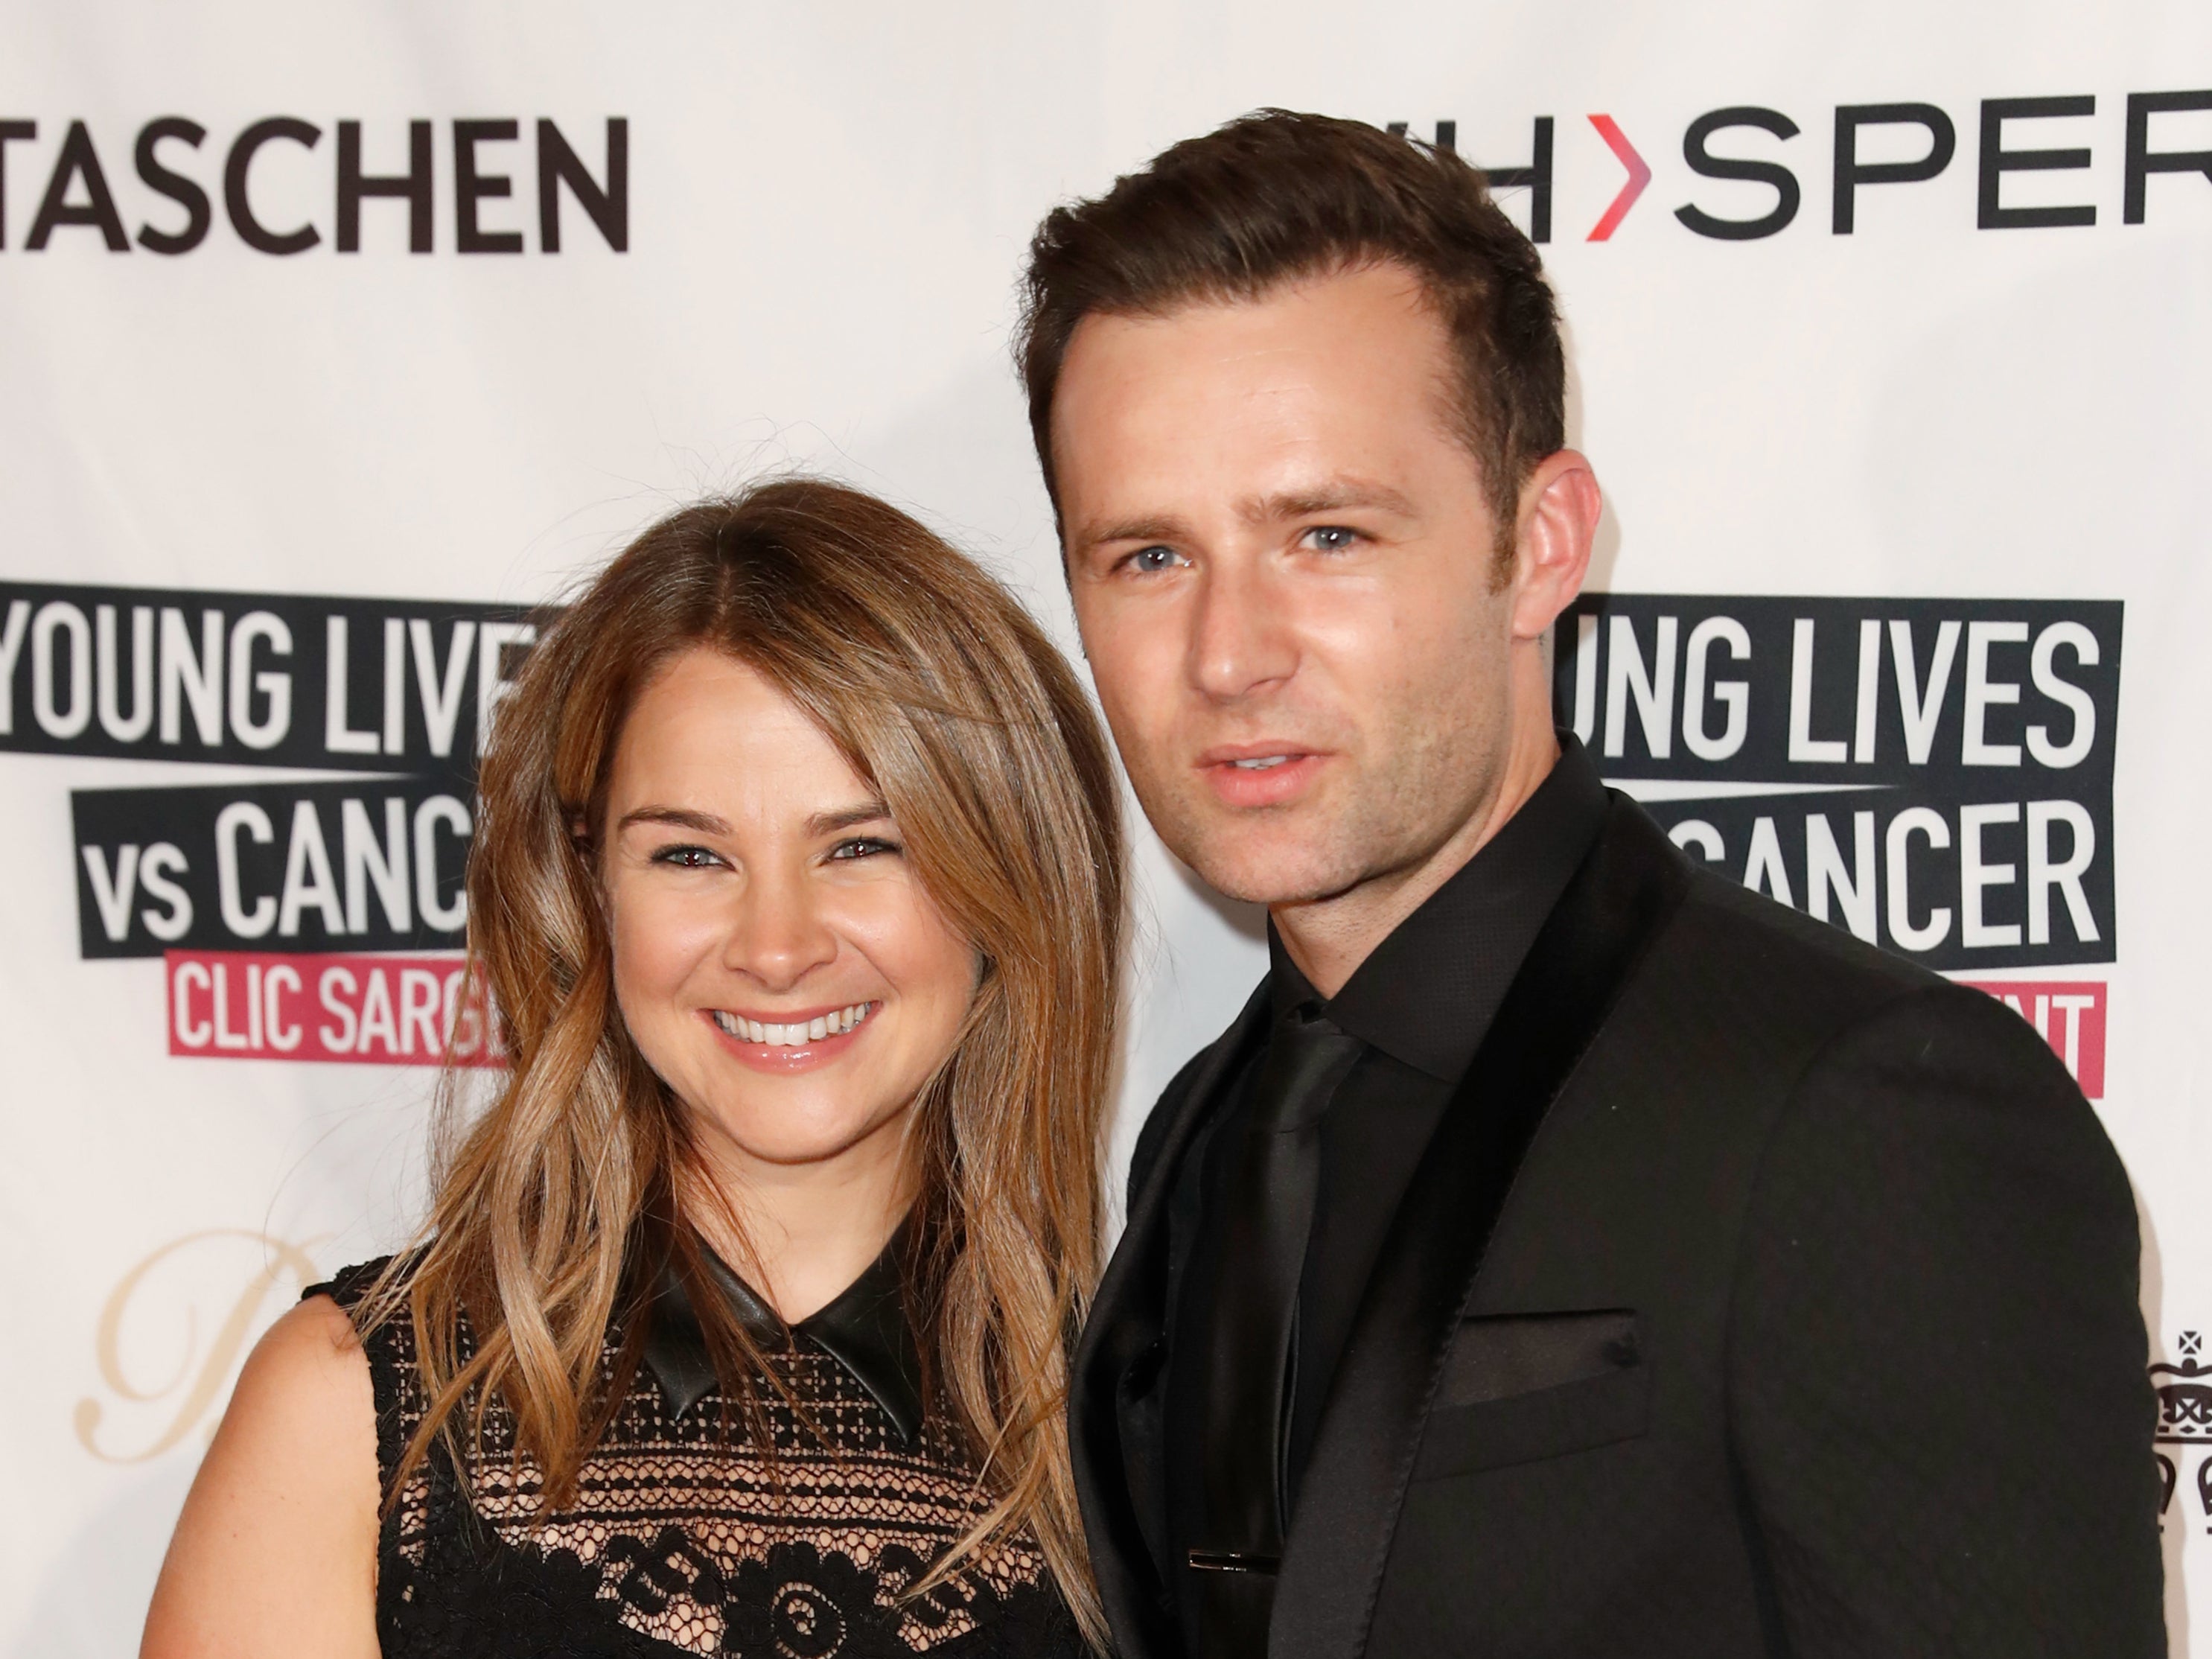 McFly star Harry Judd admits he had to become less selfish after having children The Independent